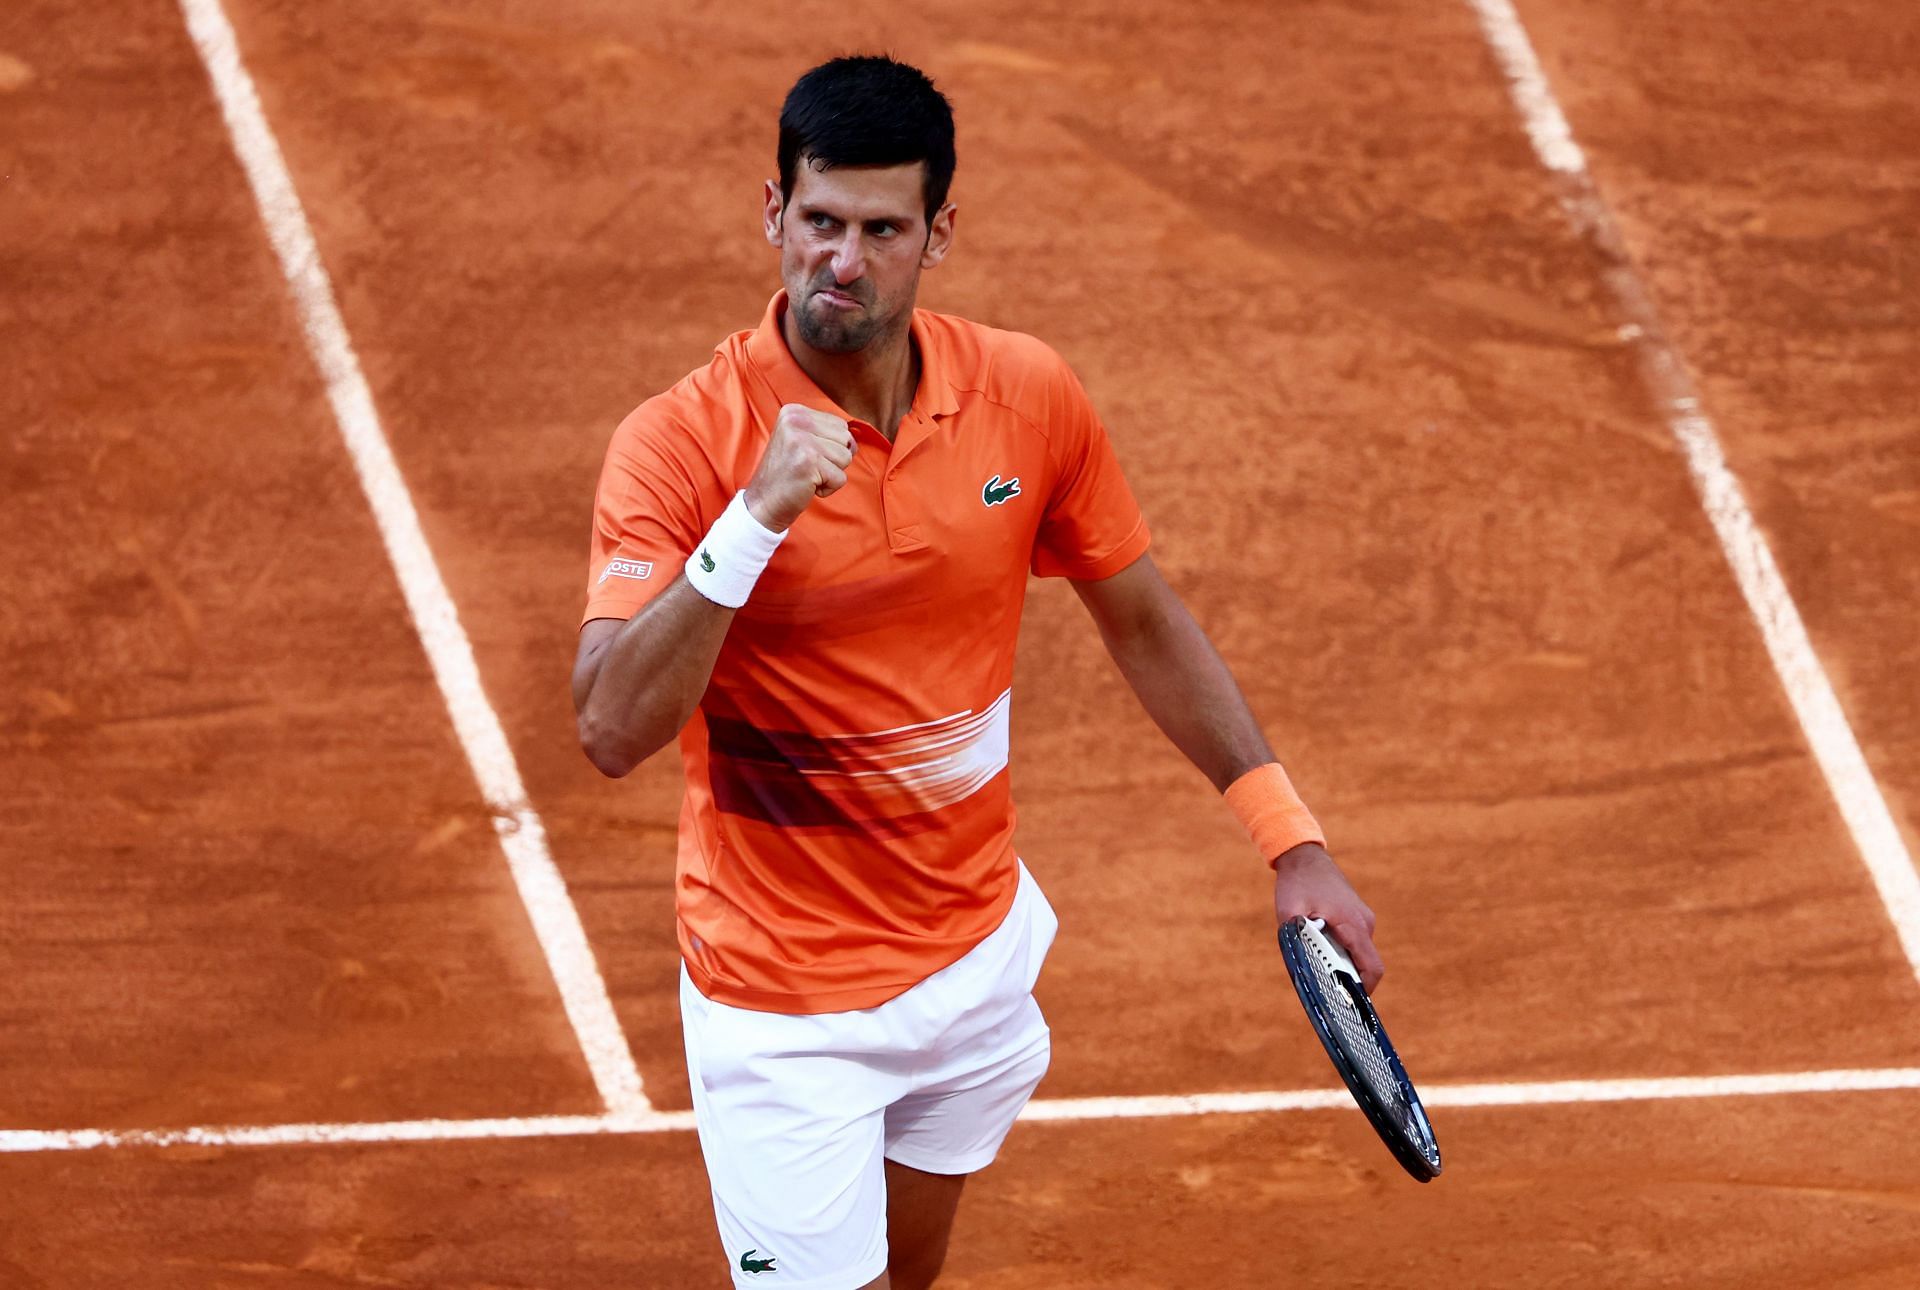 The Serb in action at the Madrid Open 